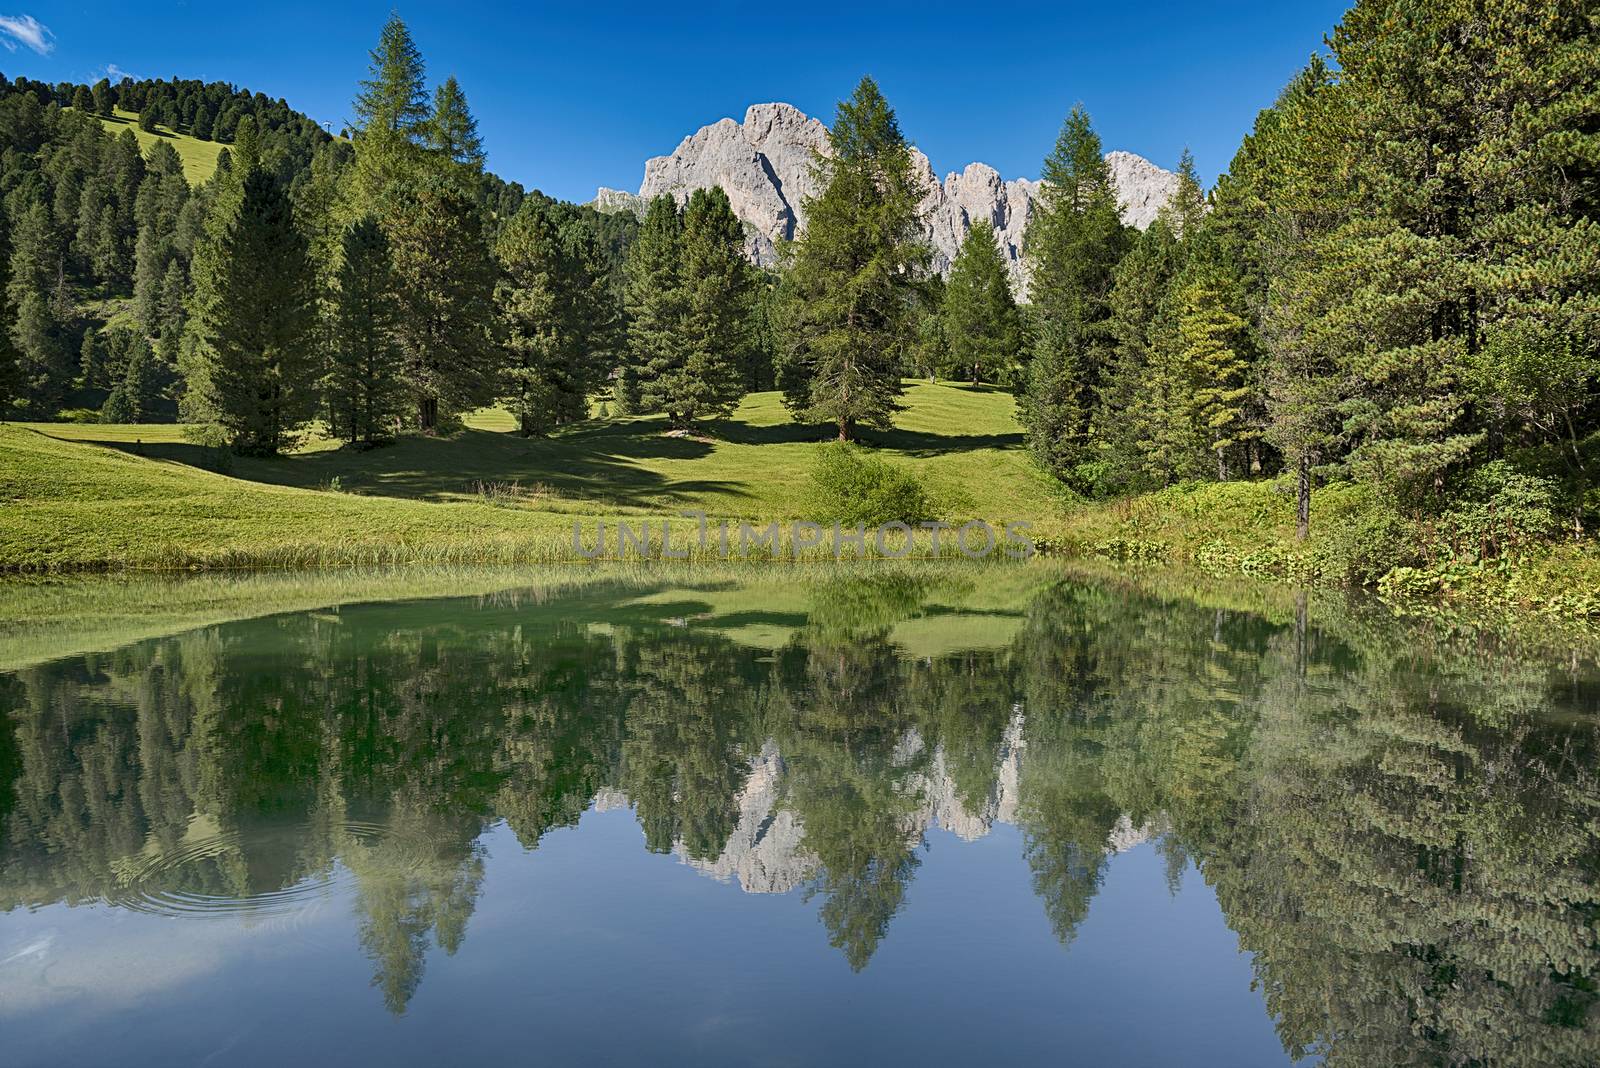 Lake in the forest with the mountains in background, summer season - Trentino-Alto Adige, Dolomites